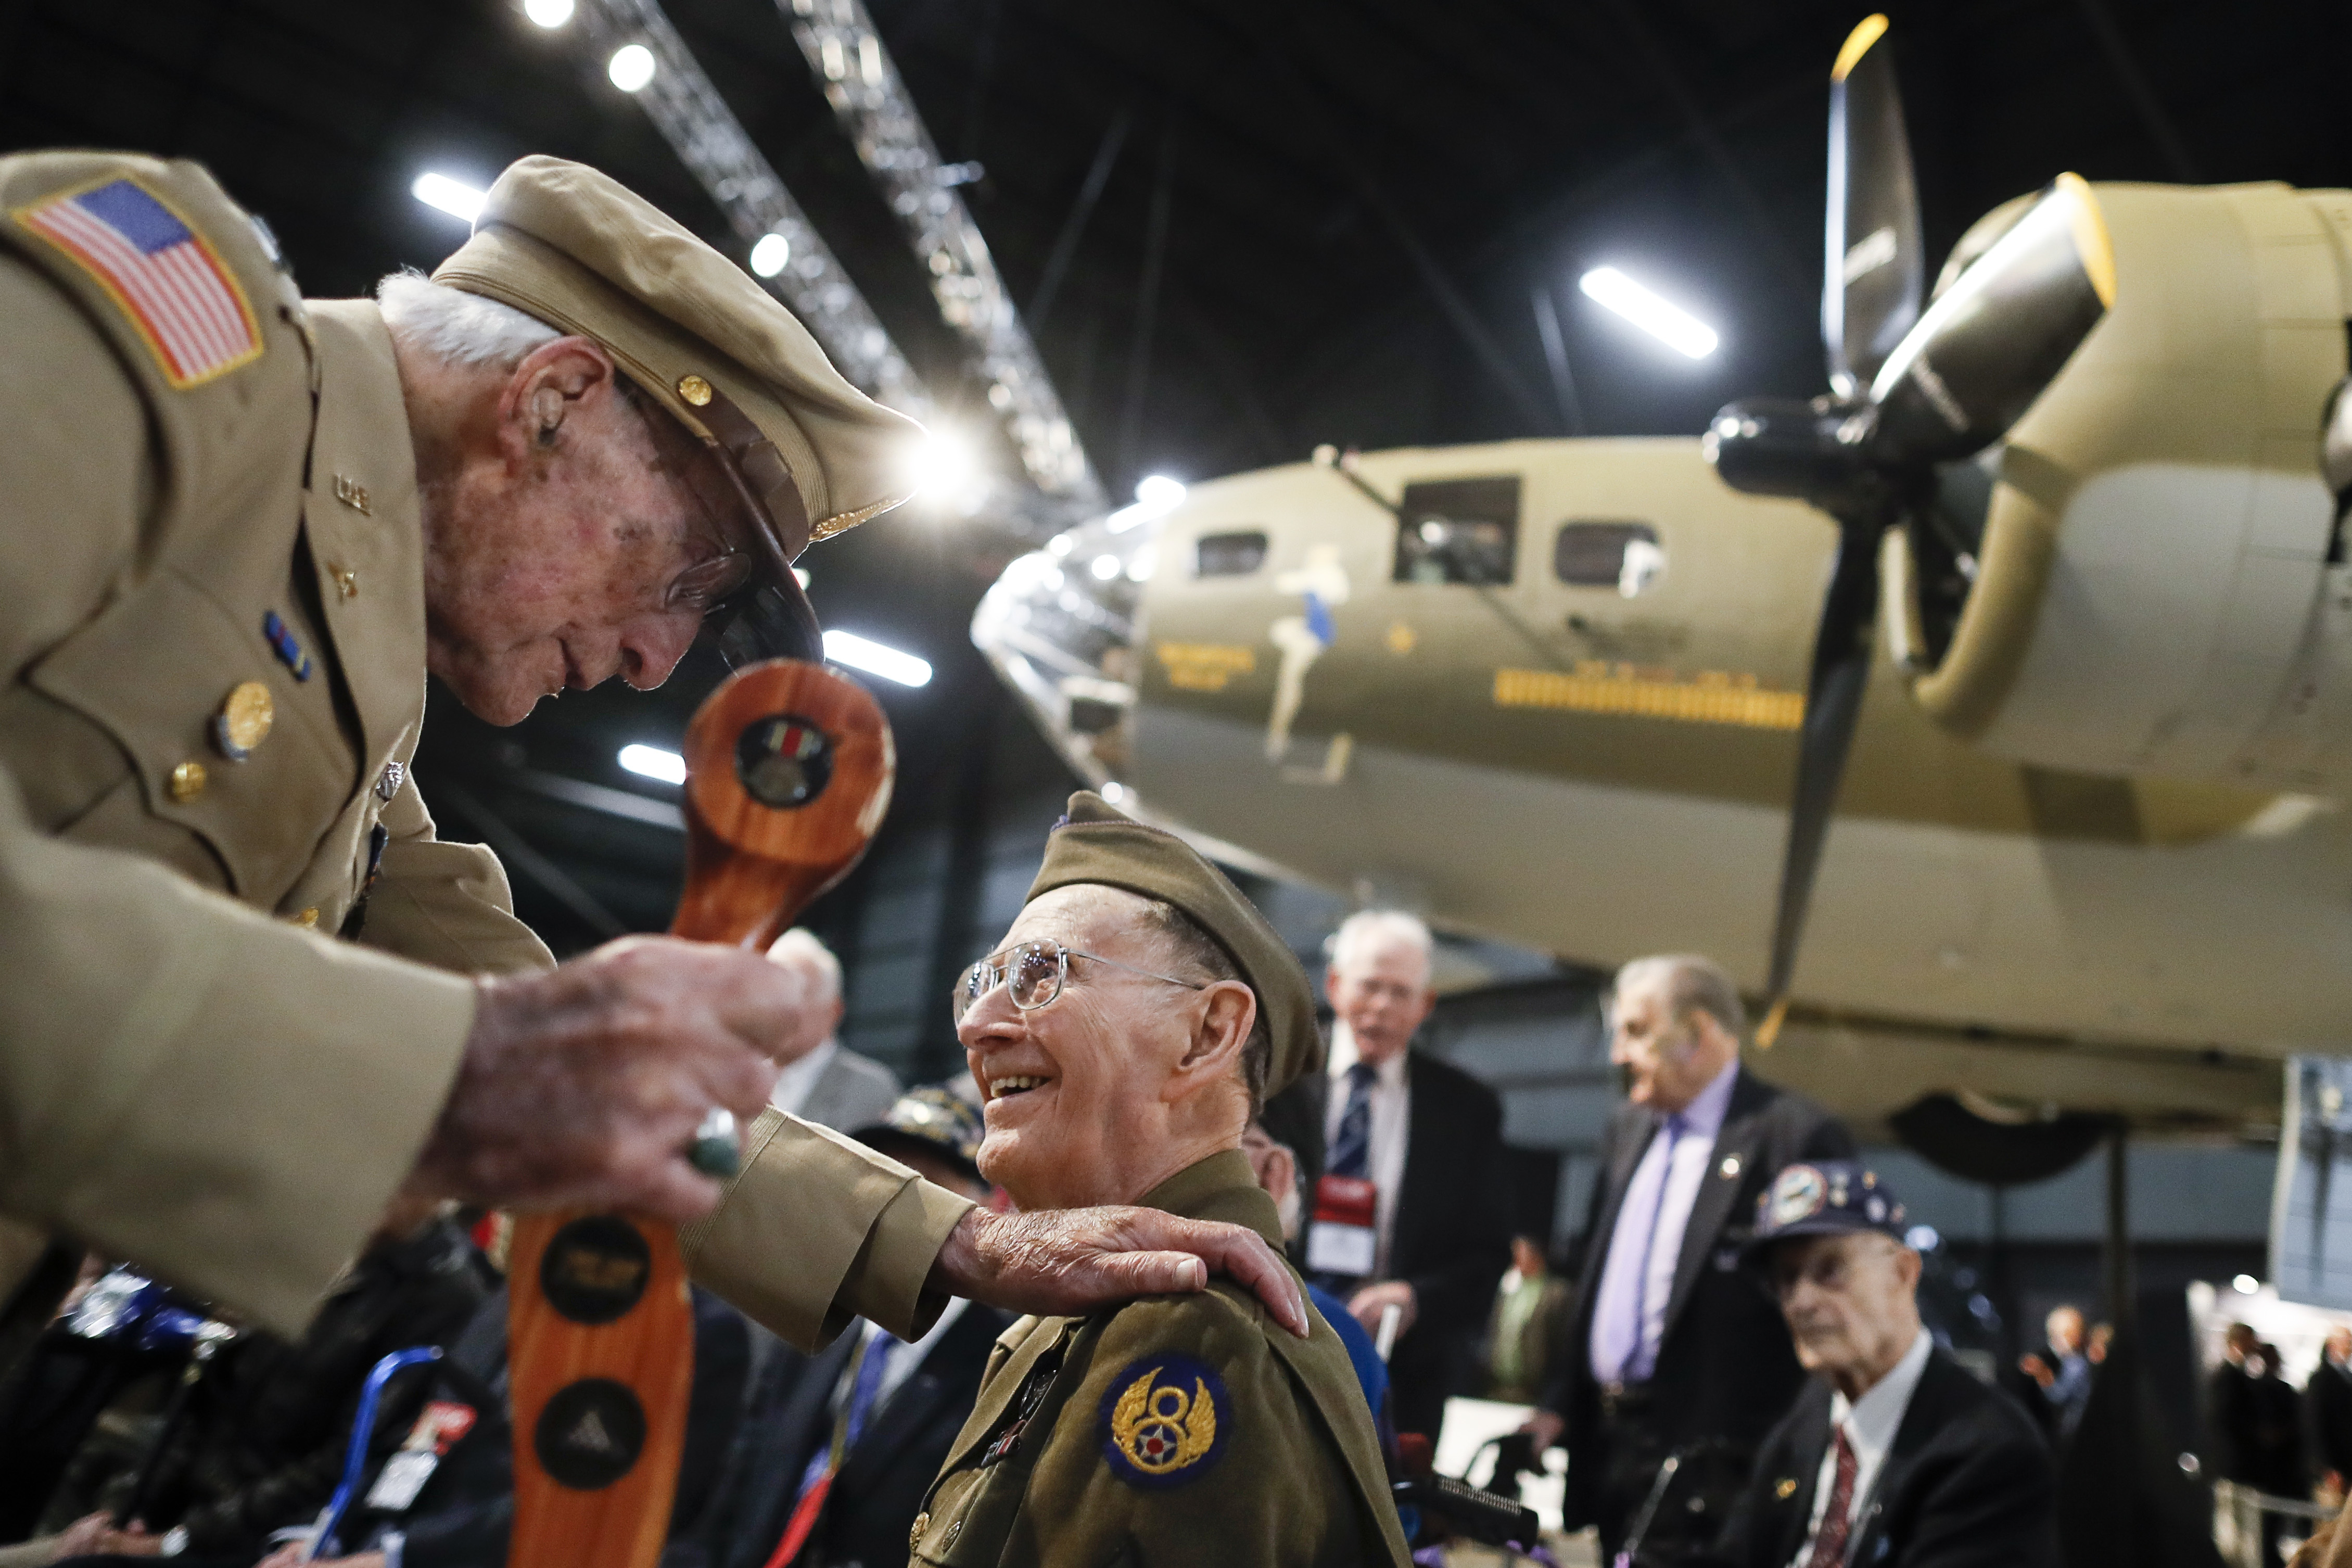 Veterans gather for a private viewing of the Memphis Belle (John Minchillo/AP)